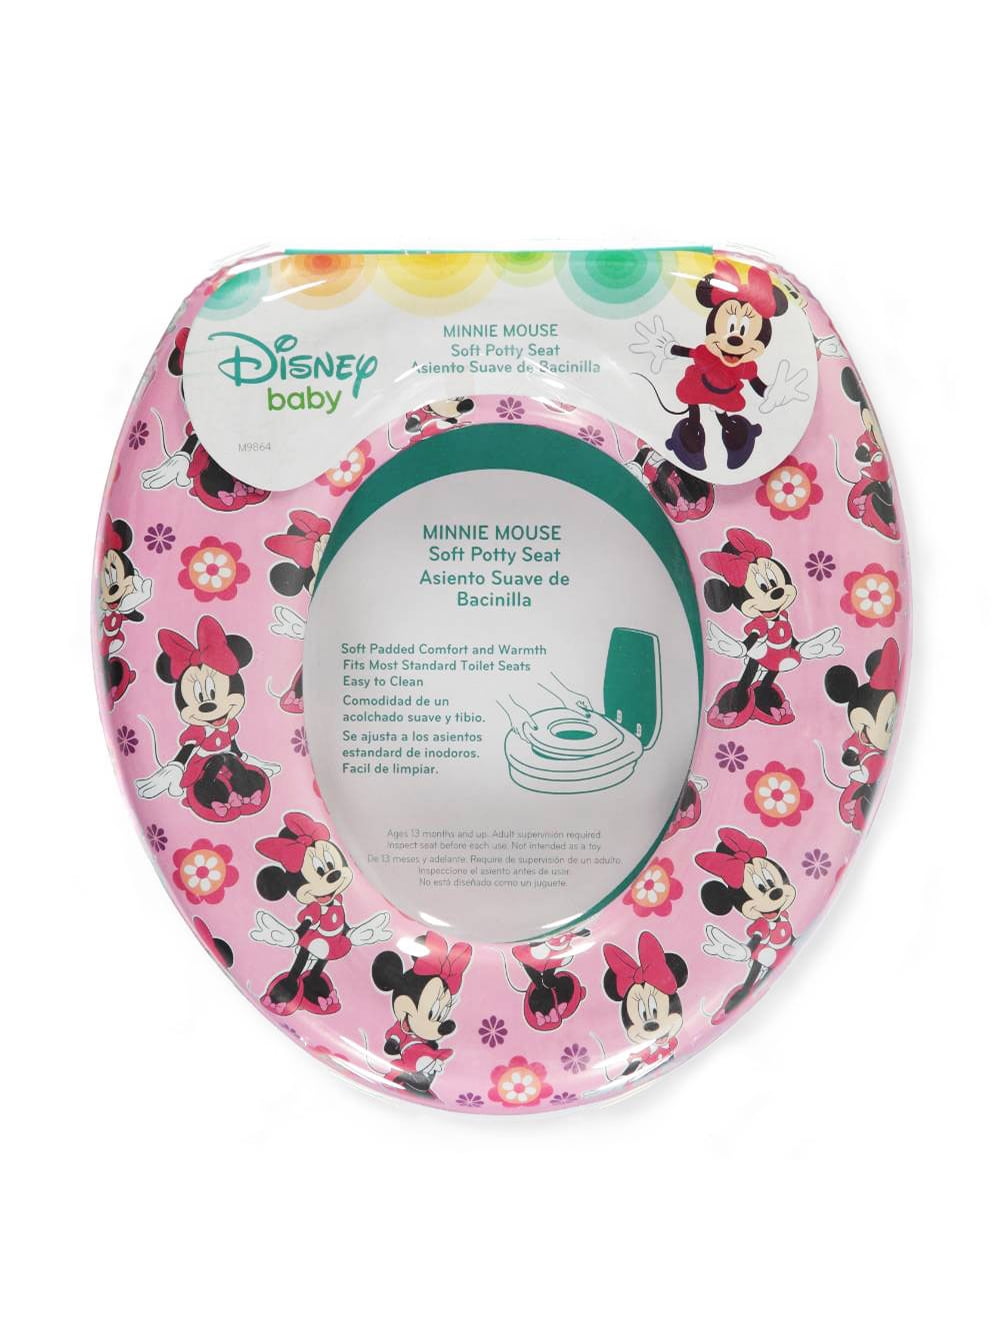 NEW Disney Minnie Mouse Bowtique Soft Potty Seat Purple FREE SHIPPING 